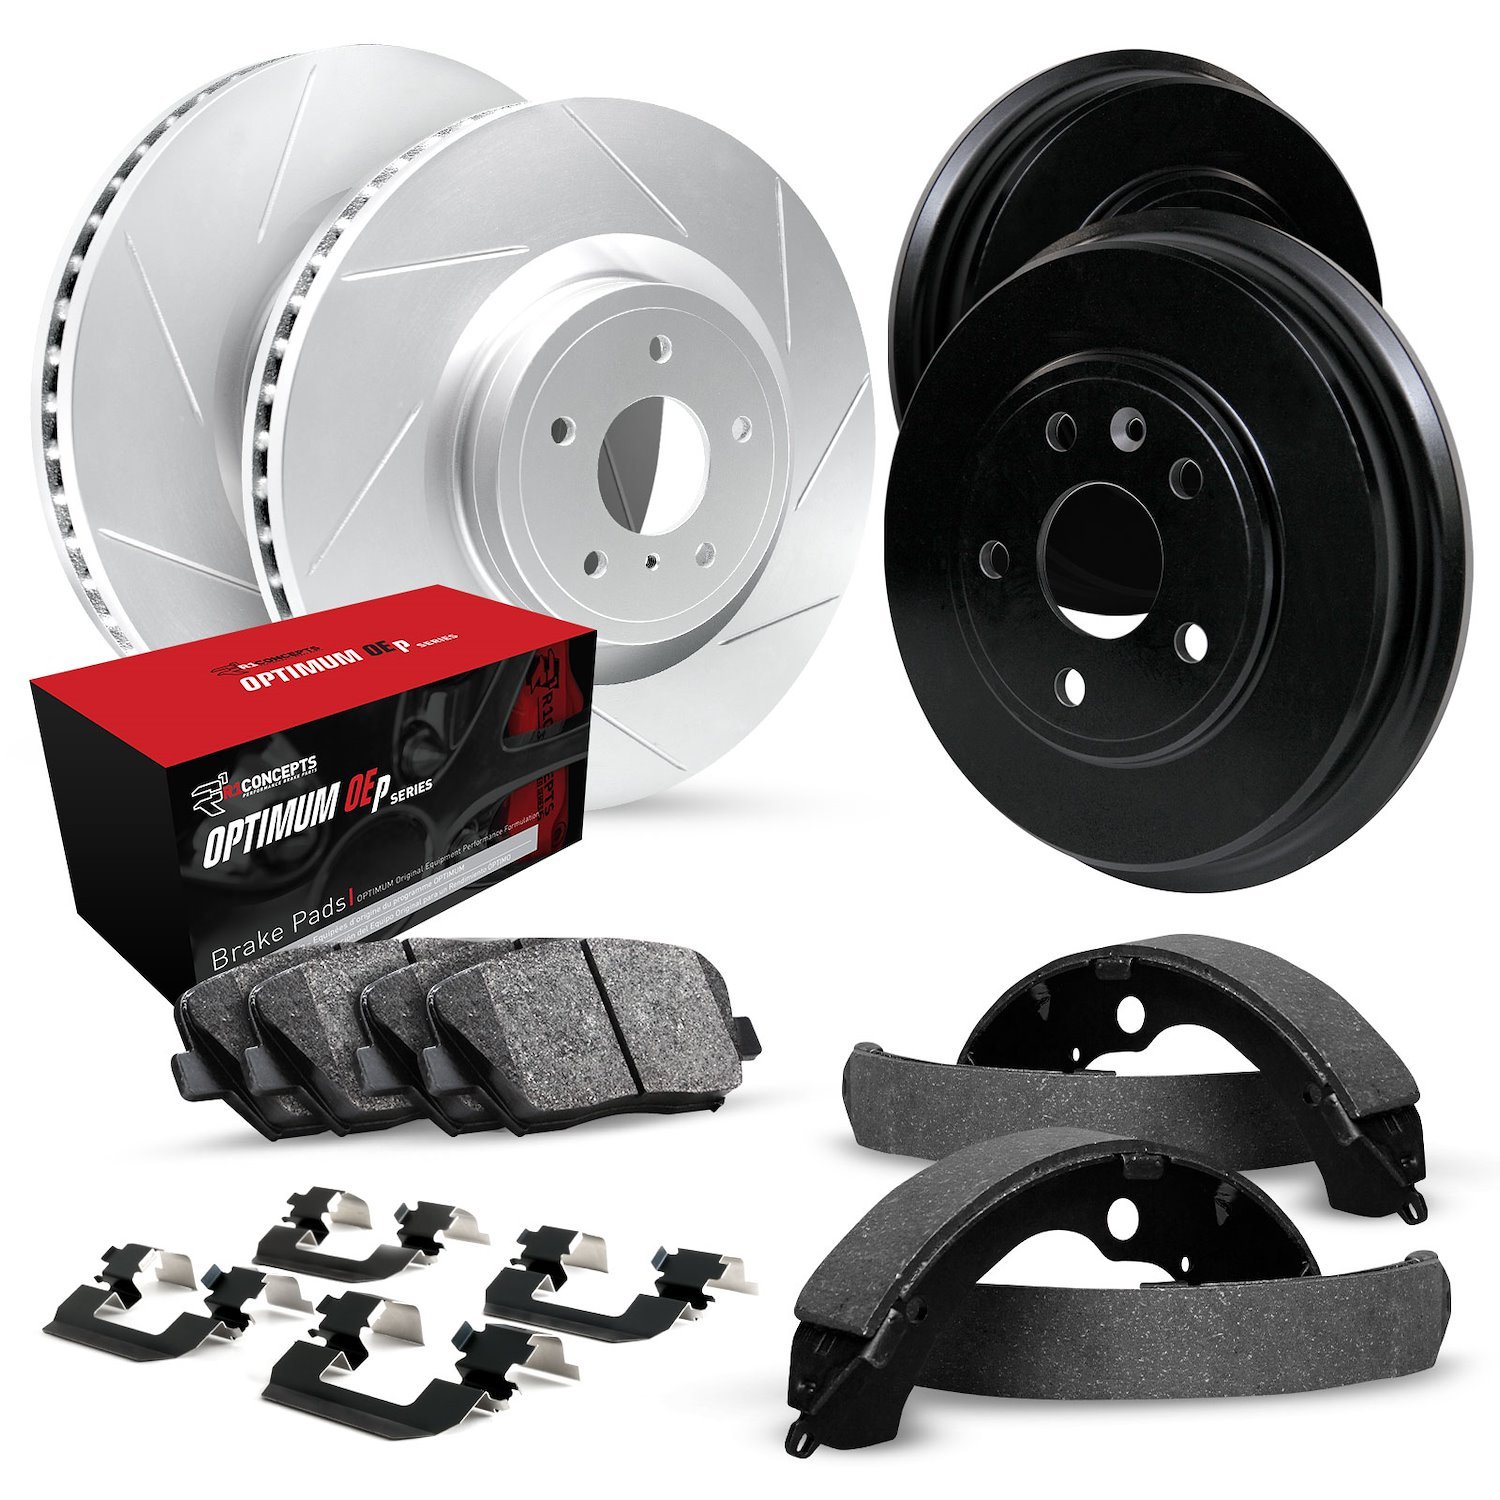 GEO-Carbon Slotted Brake Rotor & Drum Set w/Optimum OE Pads, Shoes, & Hardware, 2004-2008 GM, Position: Front & Rear